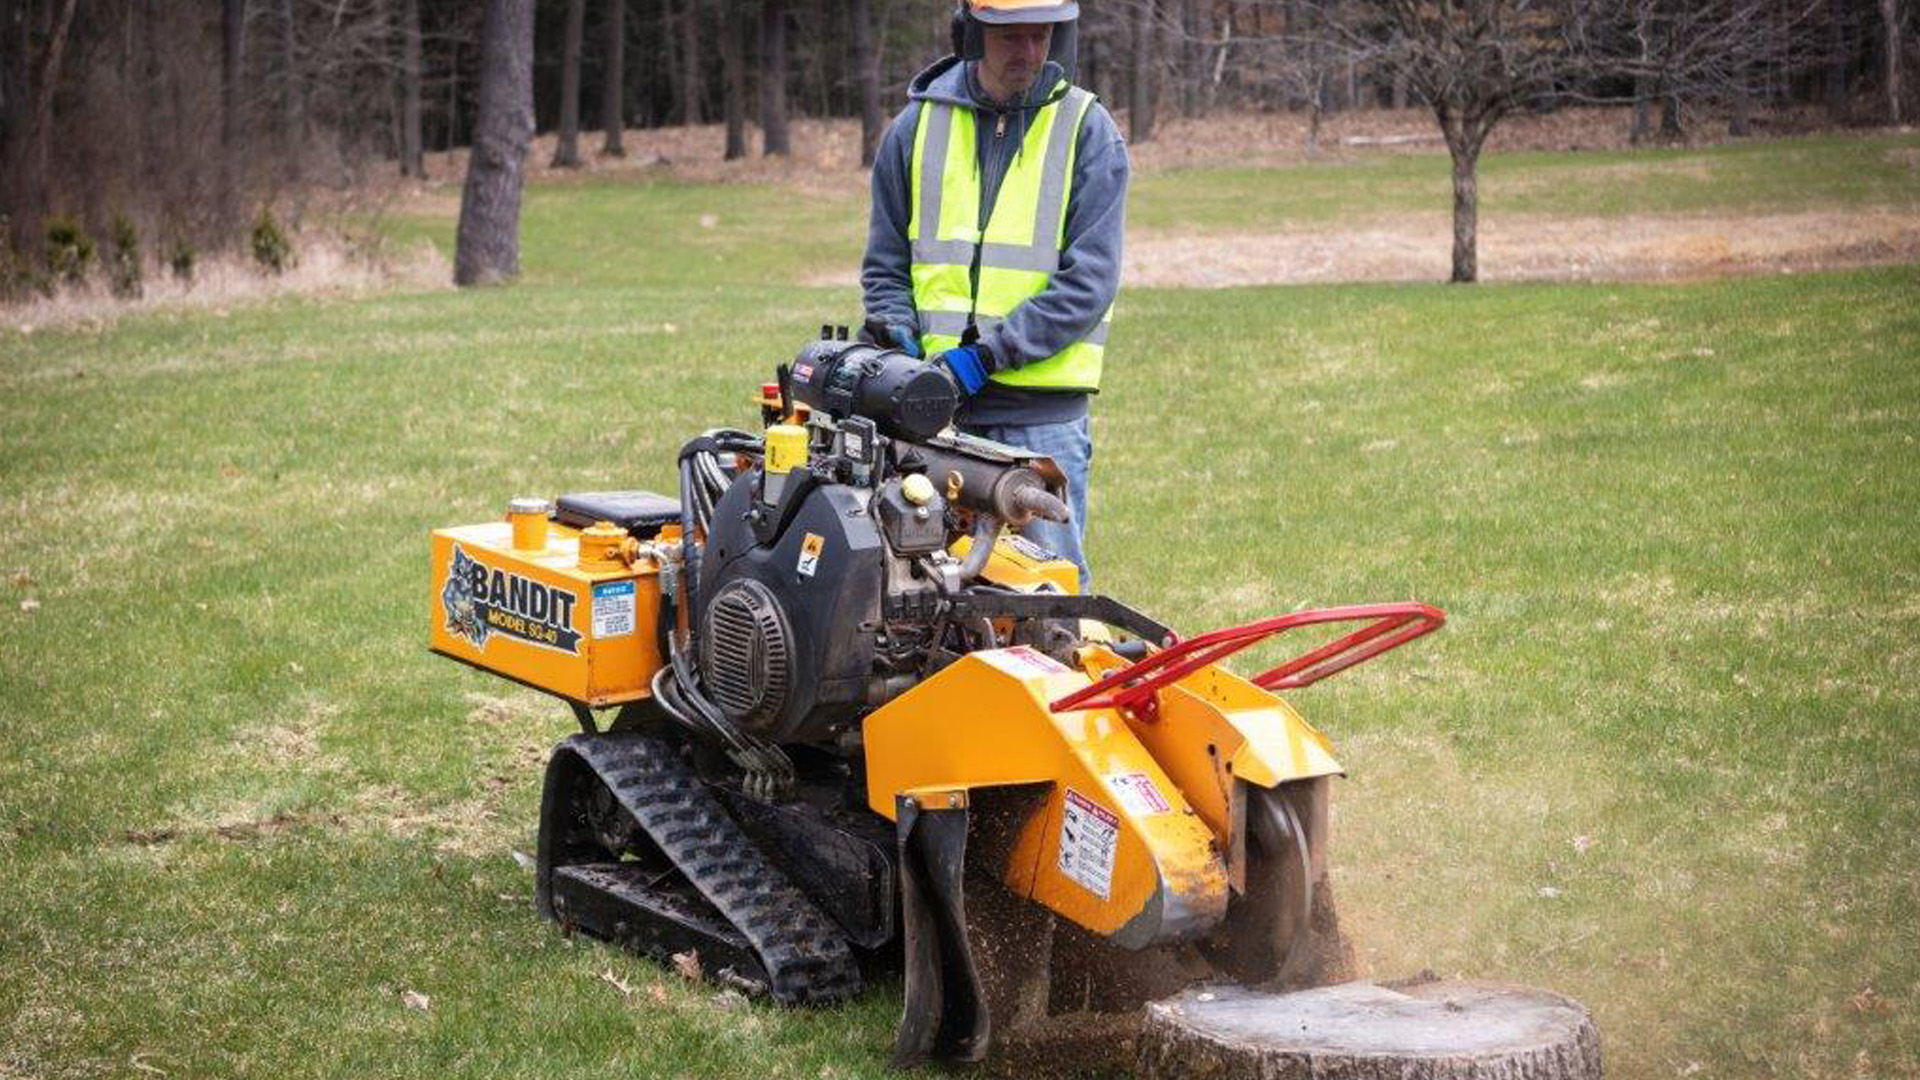 Bandit Stump Grinder SG-40 from Iron Source in Delaware